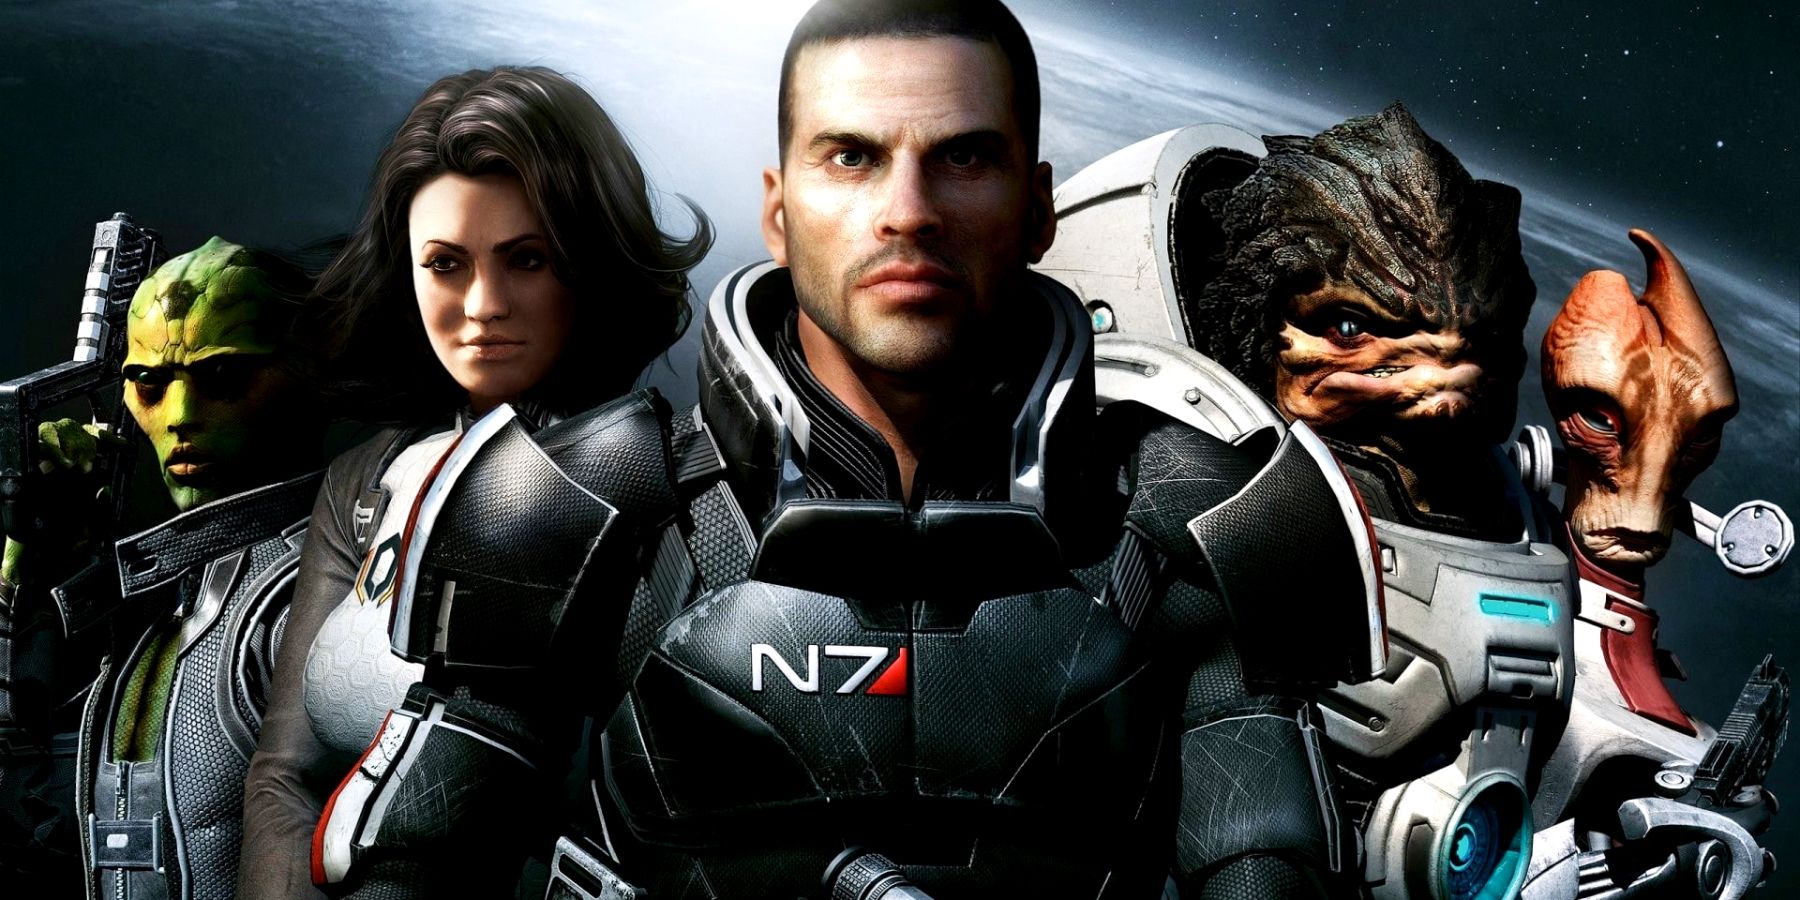 Five characters from Mass Effect 2, from left to right: Thane, Miranda, Shepard, Grunt, and Mordin.